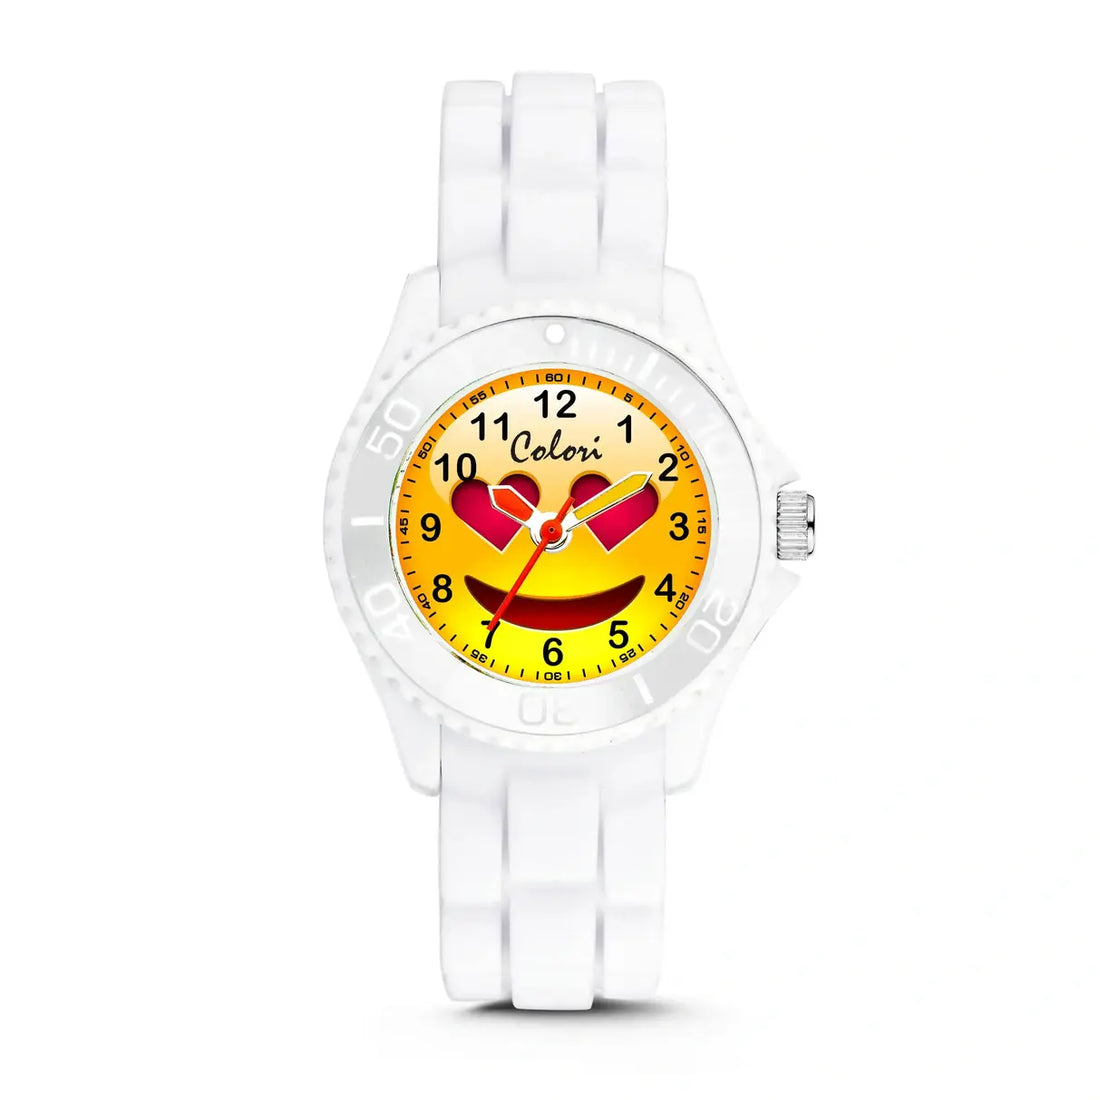 Meet the Brands: Colori Watches for Kids